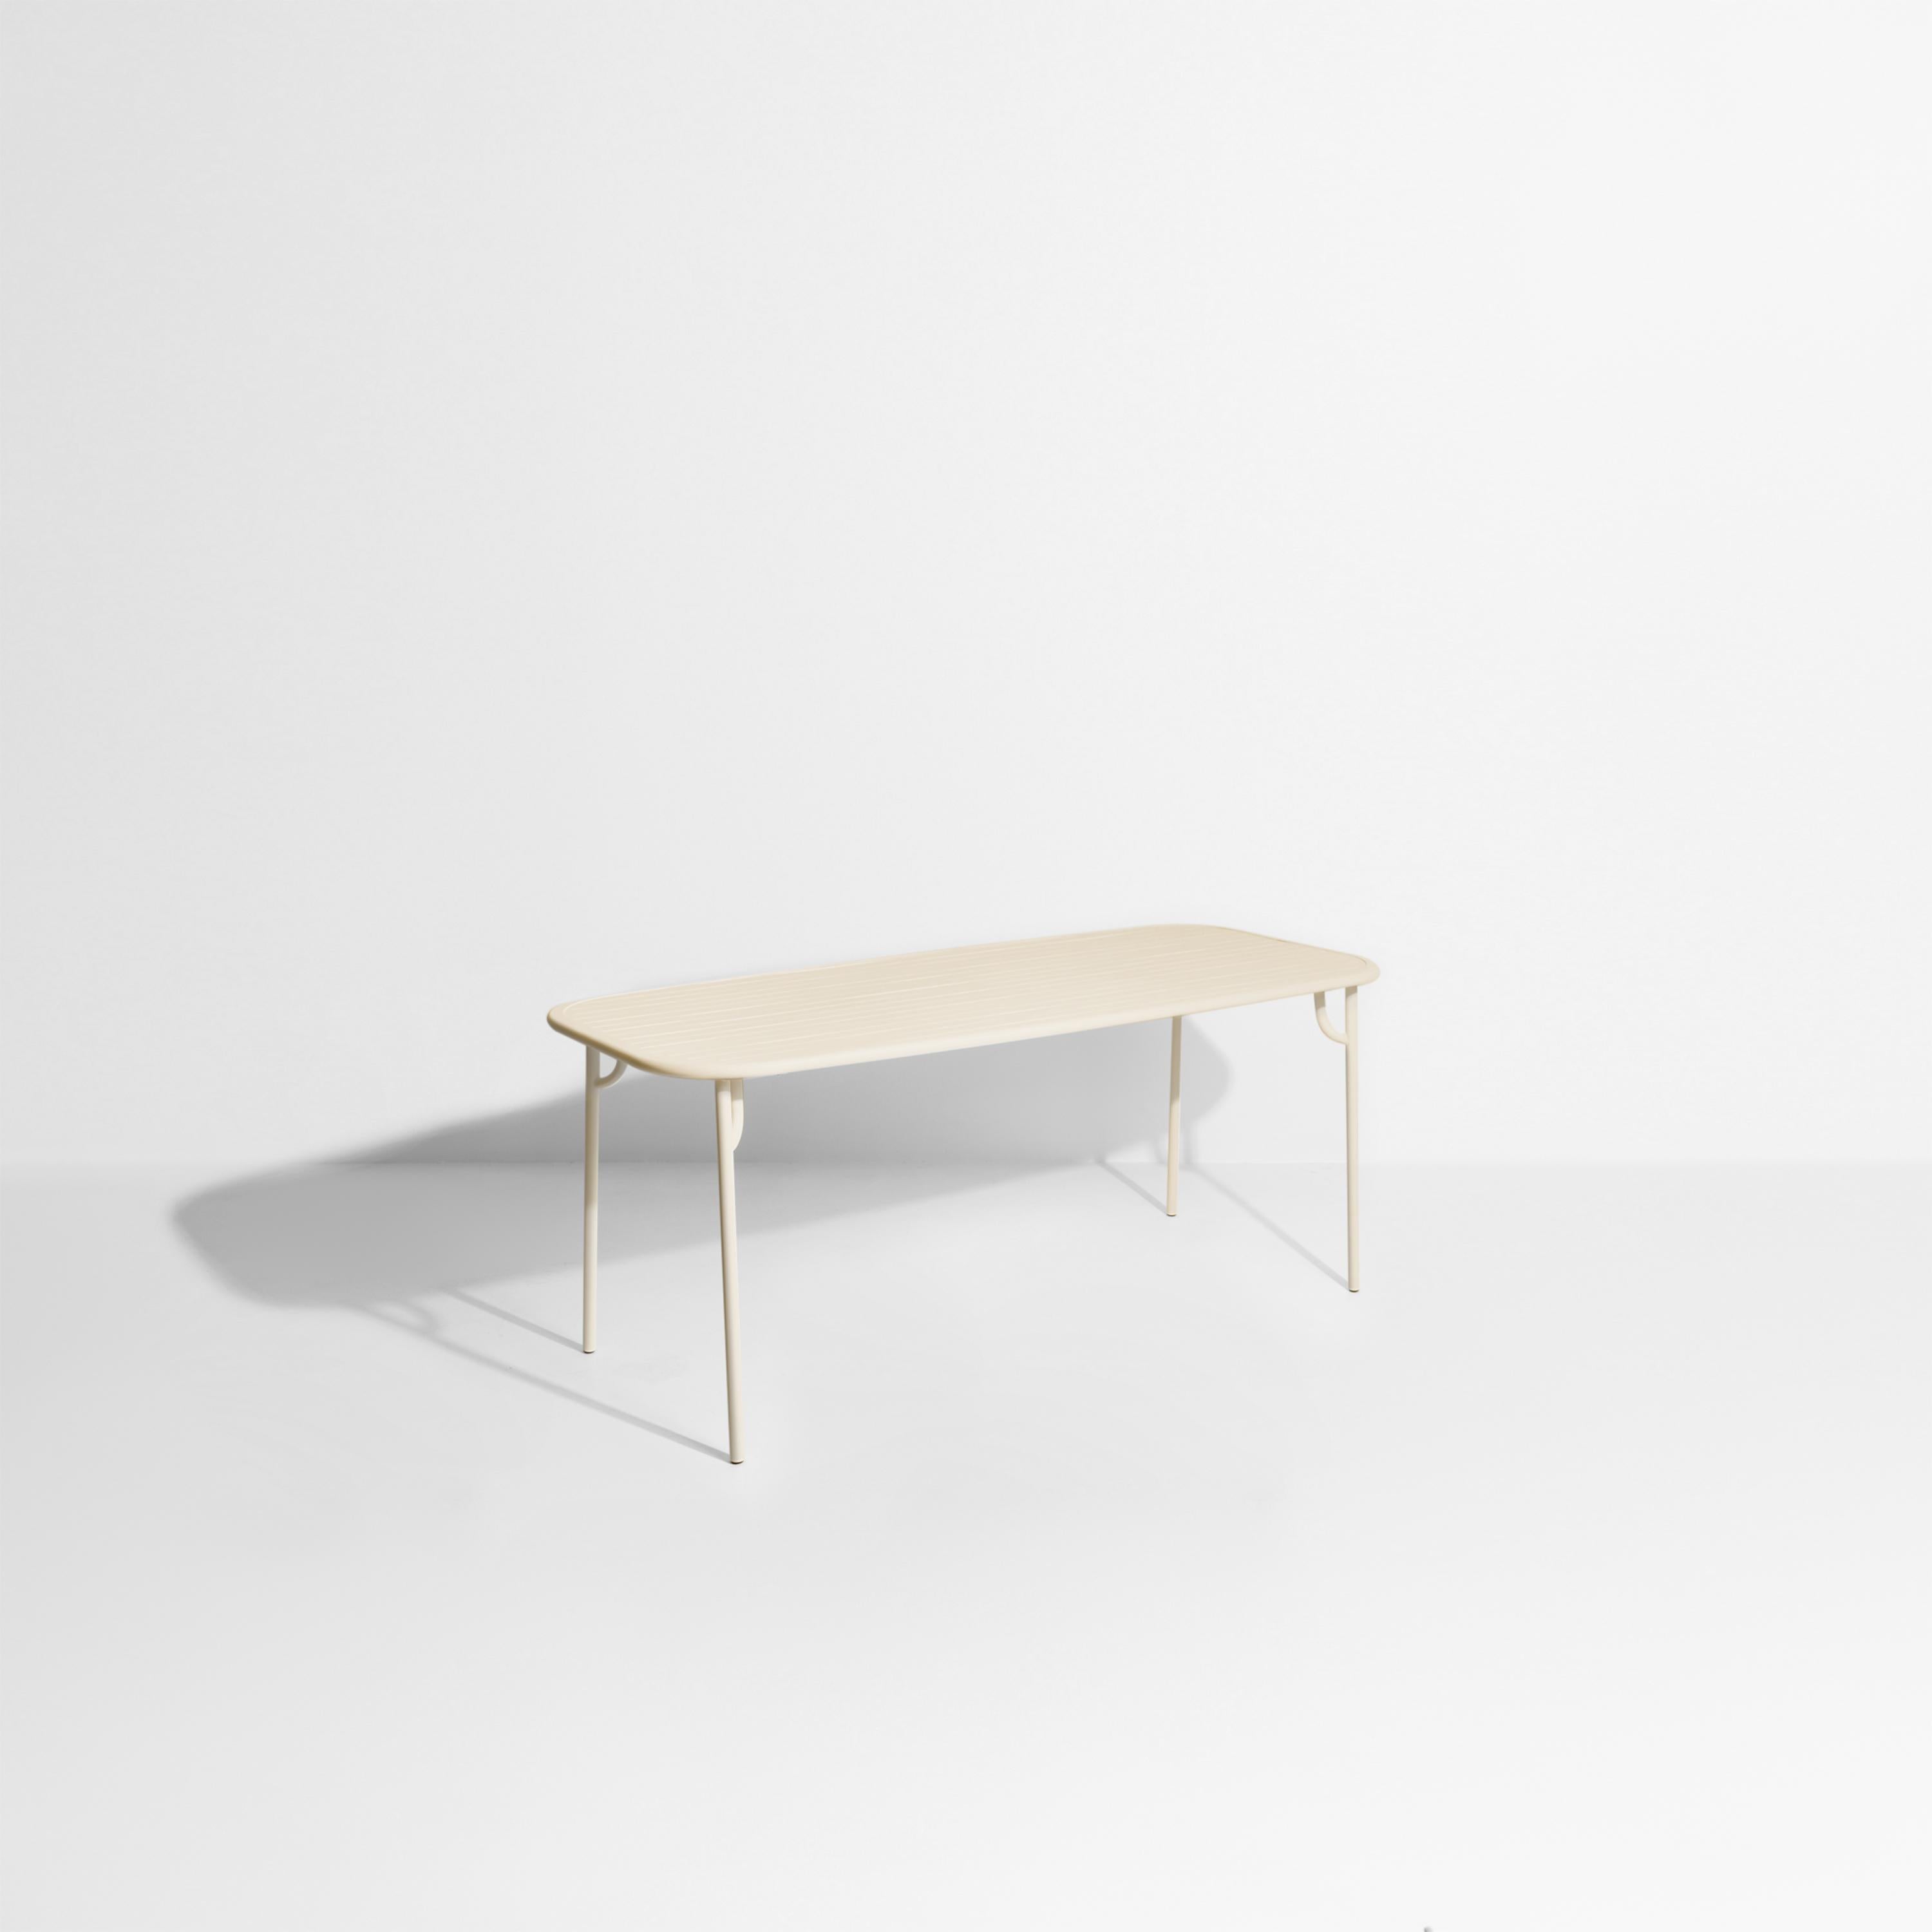 Petite Friture Week-End Medium Rectangular Dining Table in Ivory Aluminium with Slats by Studio BrichetZiegler, 2017

The week-end collection is a full range of outdoor furniture, in aluminium grained epoxy paint, matt finish, that includes 18